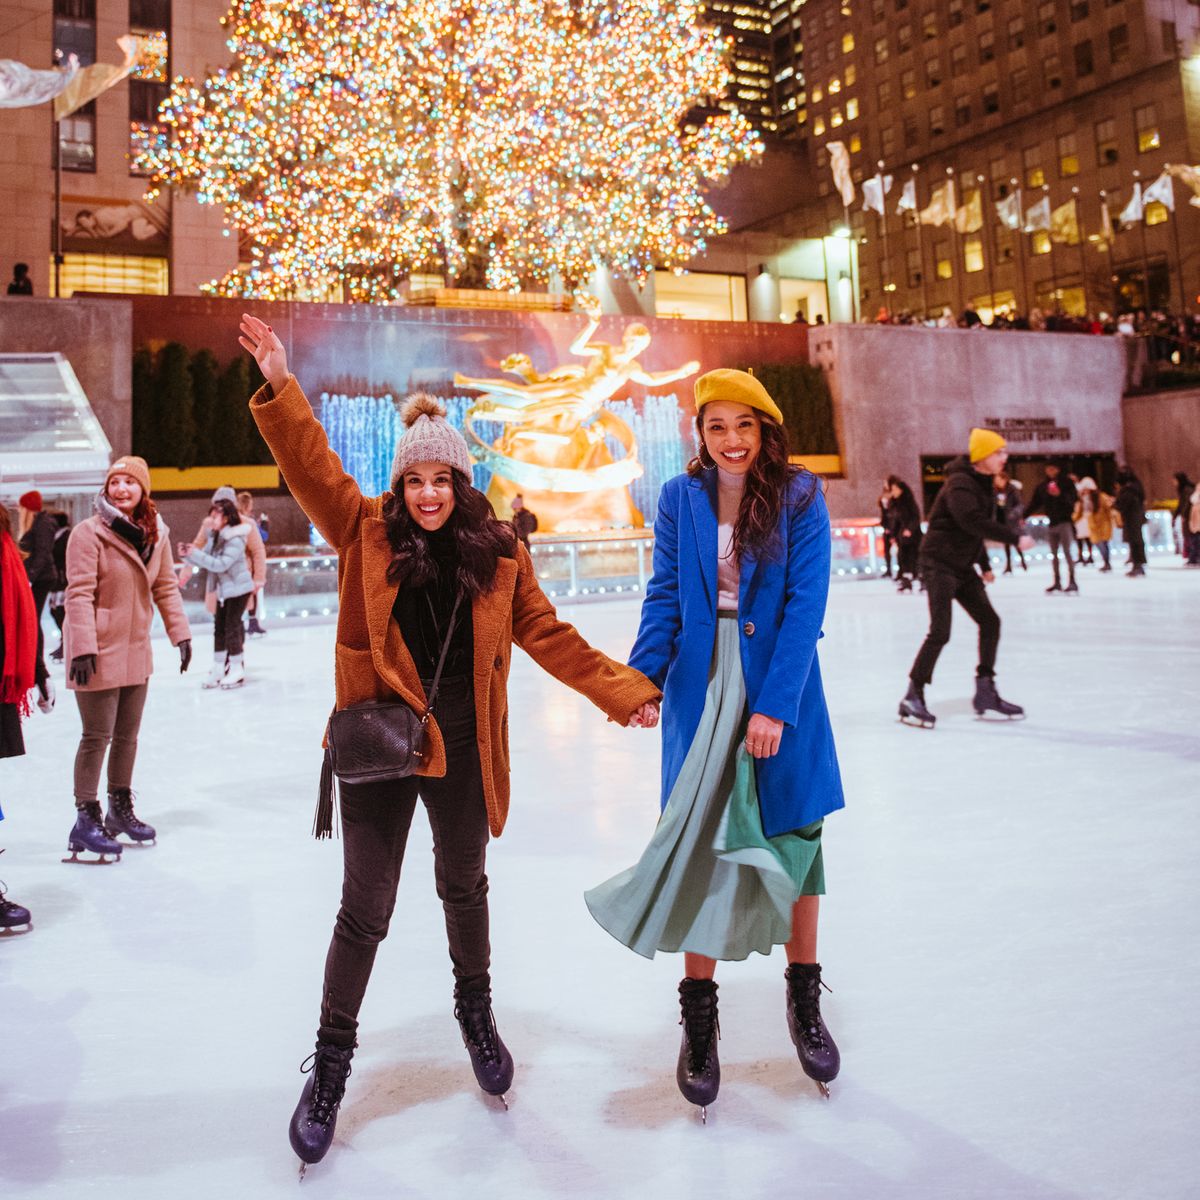 Ice skating at the Rock Center rink as a NYC winter tradition.